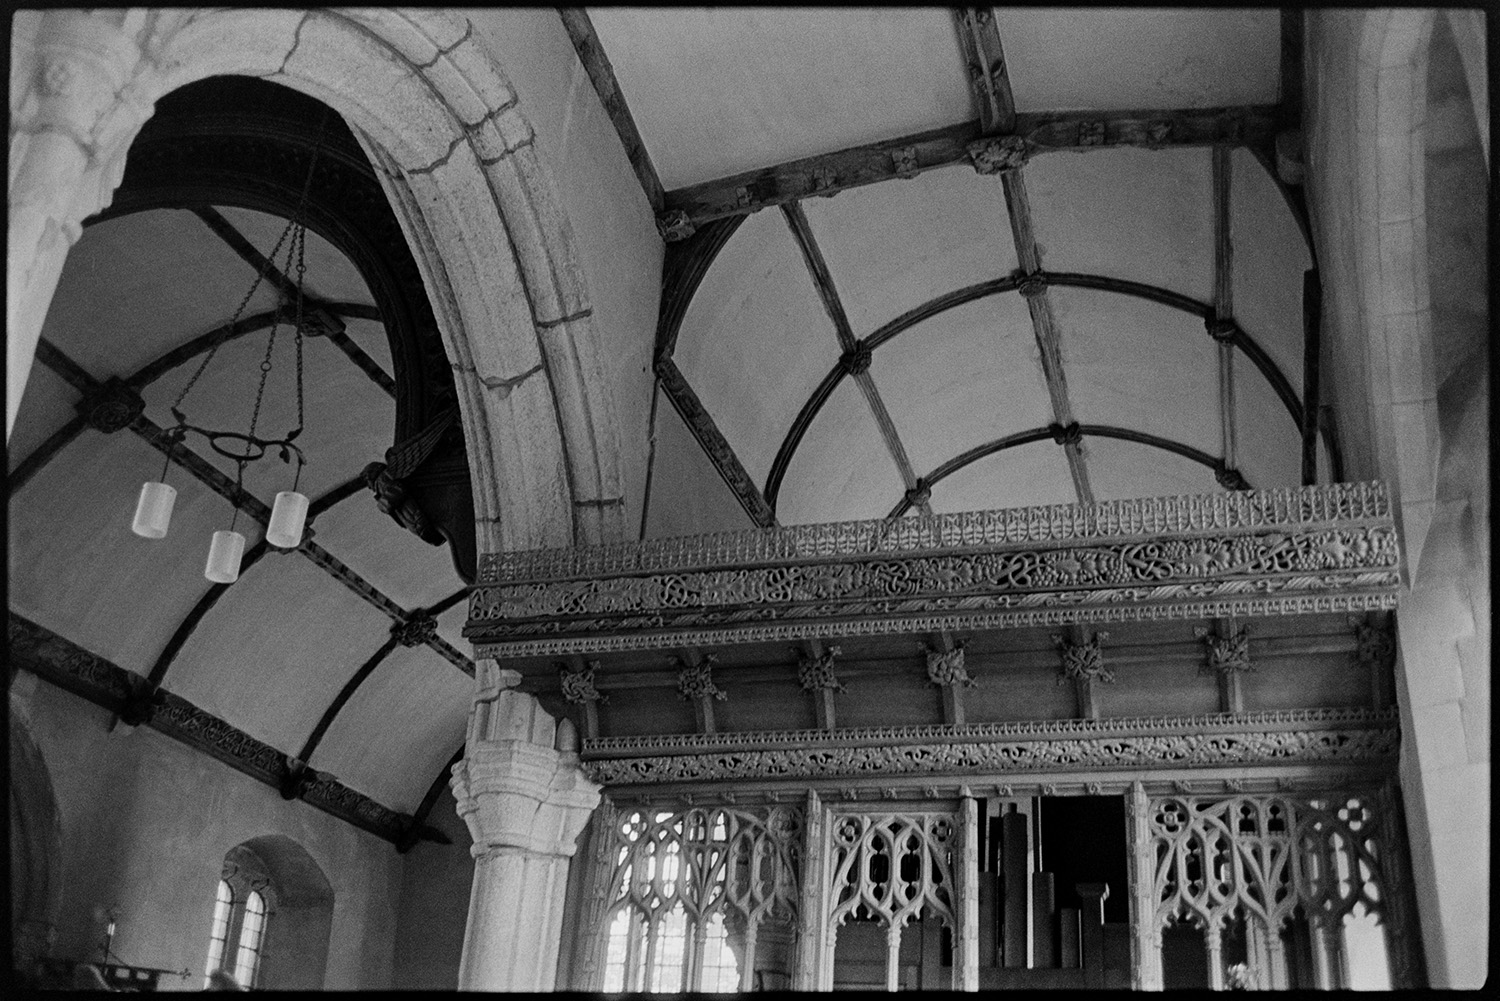 Interior and exterior of Church with fine ceilings. 
[The interior of the church at Sampford Courtenay. A carved wooden screen and vaulted ceiling are visible.]